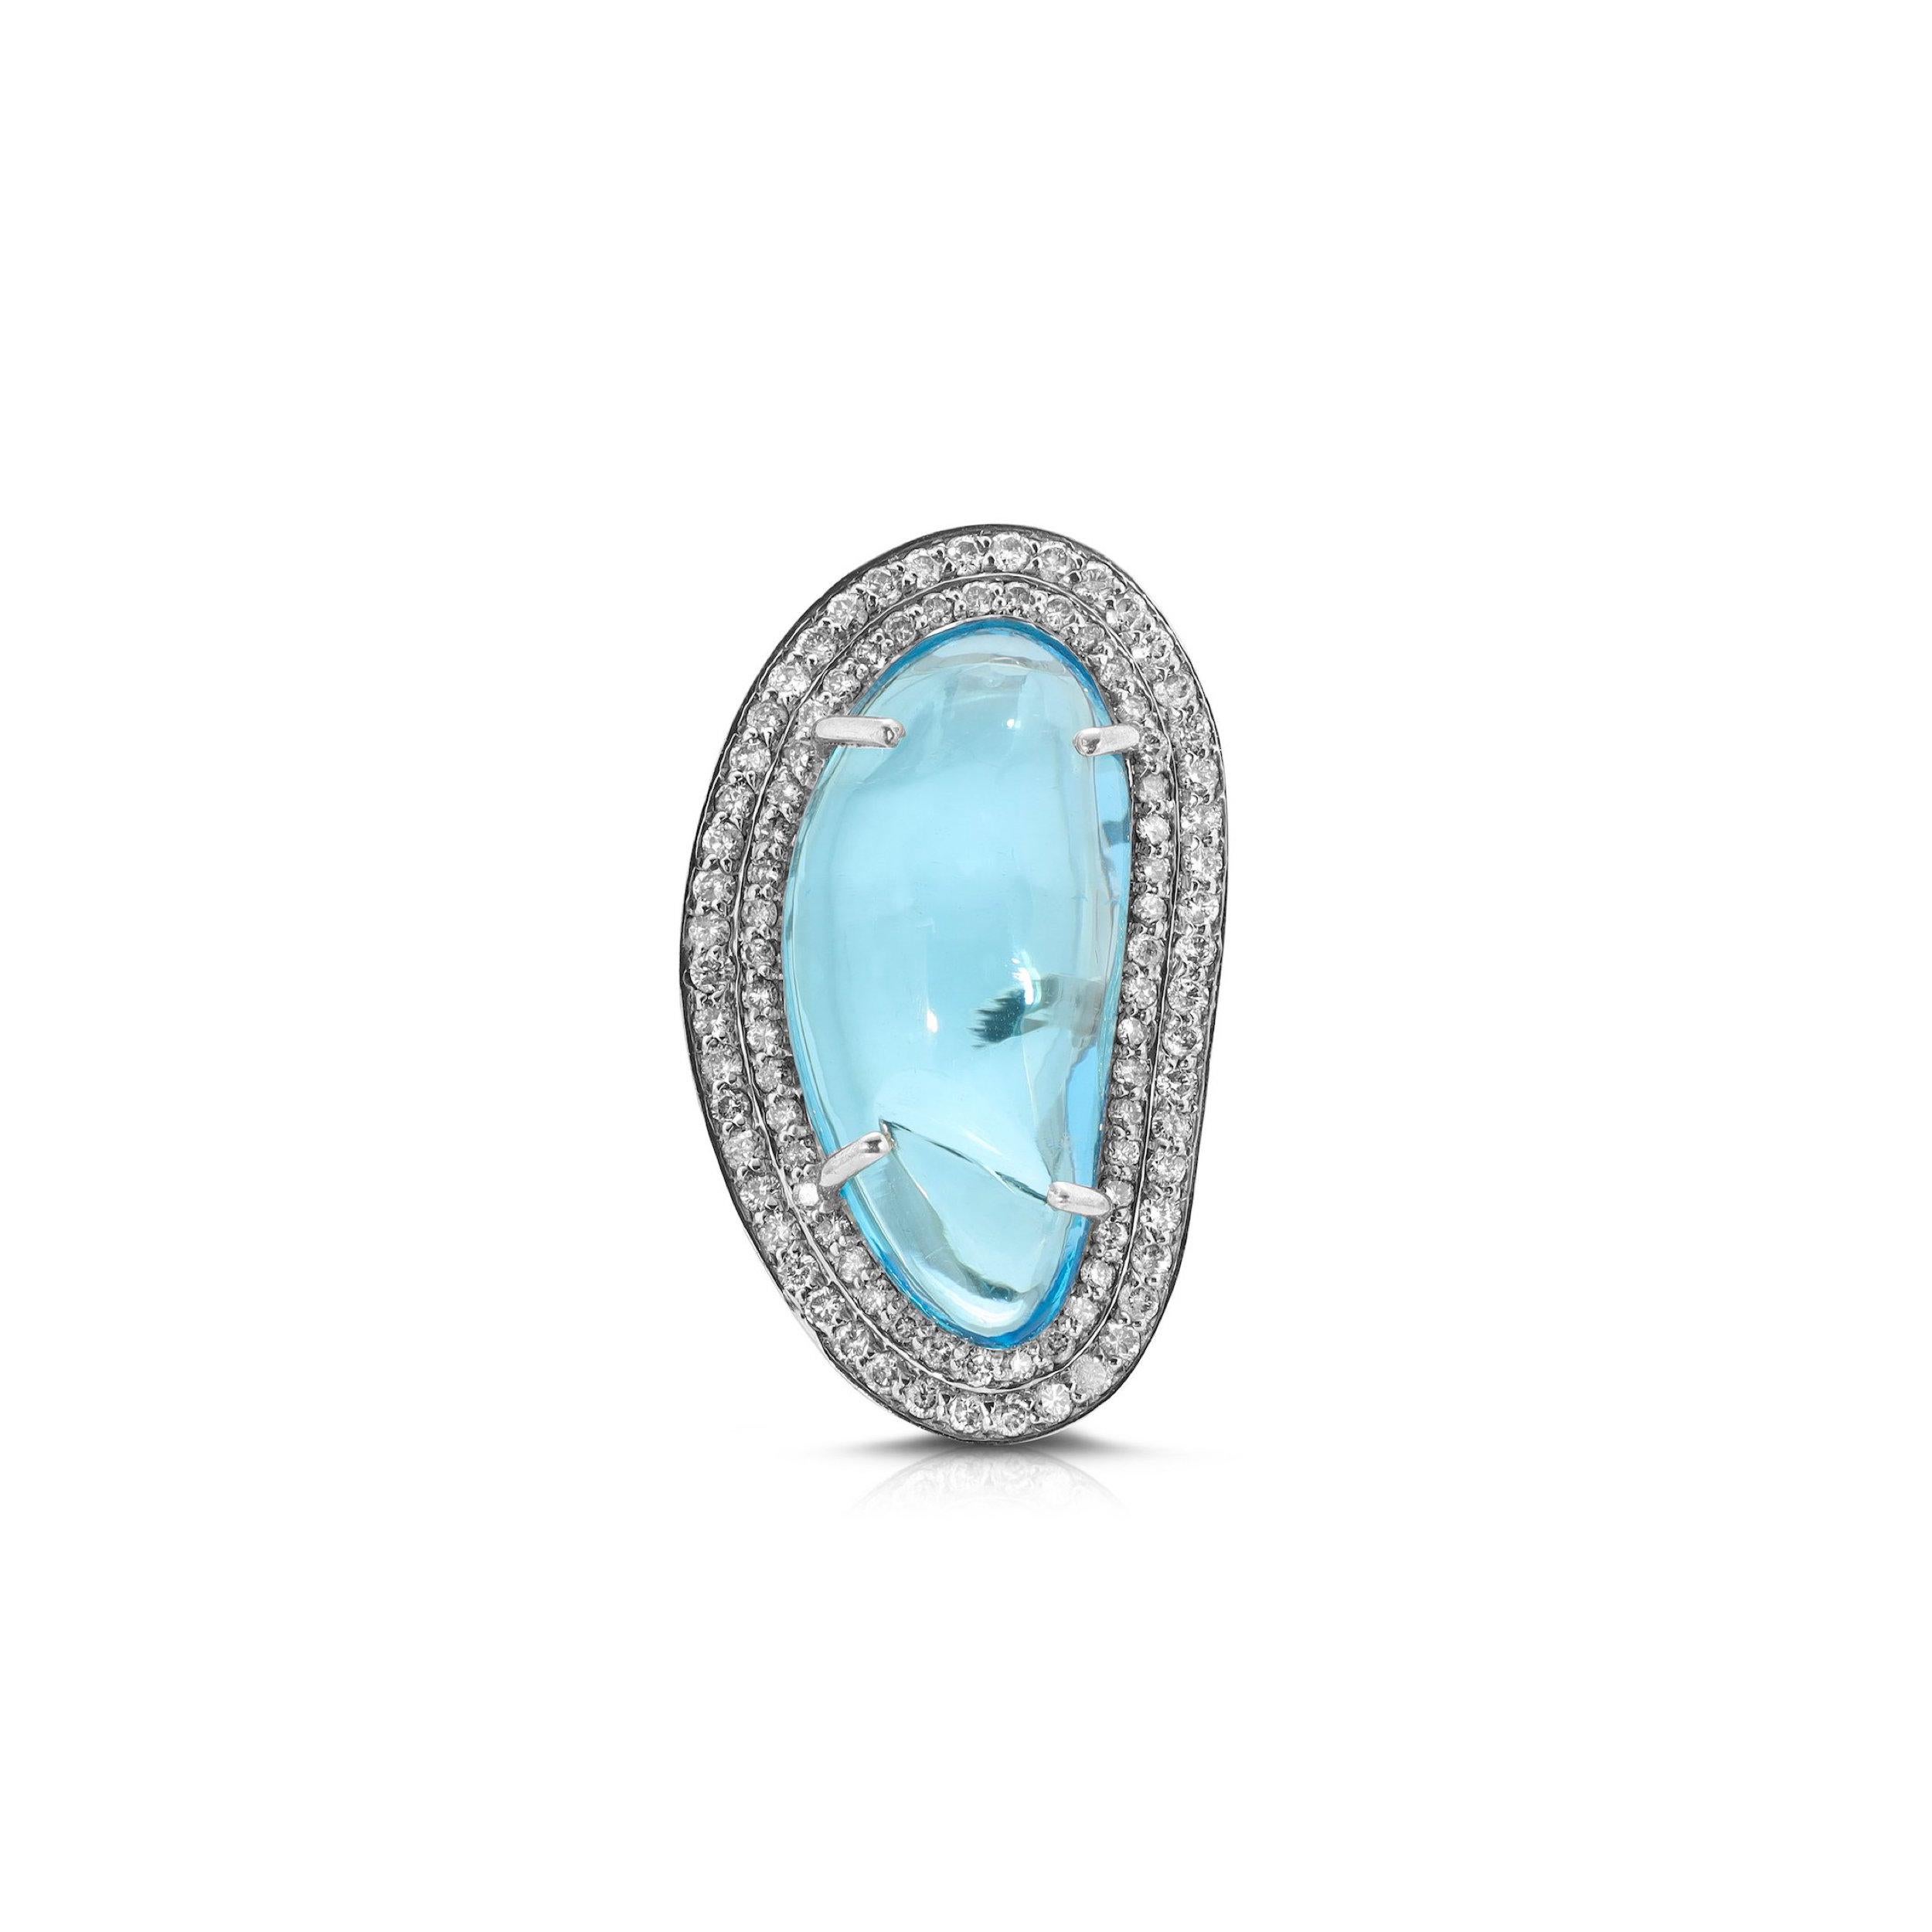 Make a statement with this gorgeous 18 Karat White Gold polish over Silver cocktail ring featuring an alluring Cabochon Blue Topaz set with sparkling White Diamonds in a stunning abstract design.